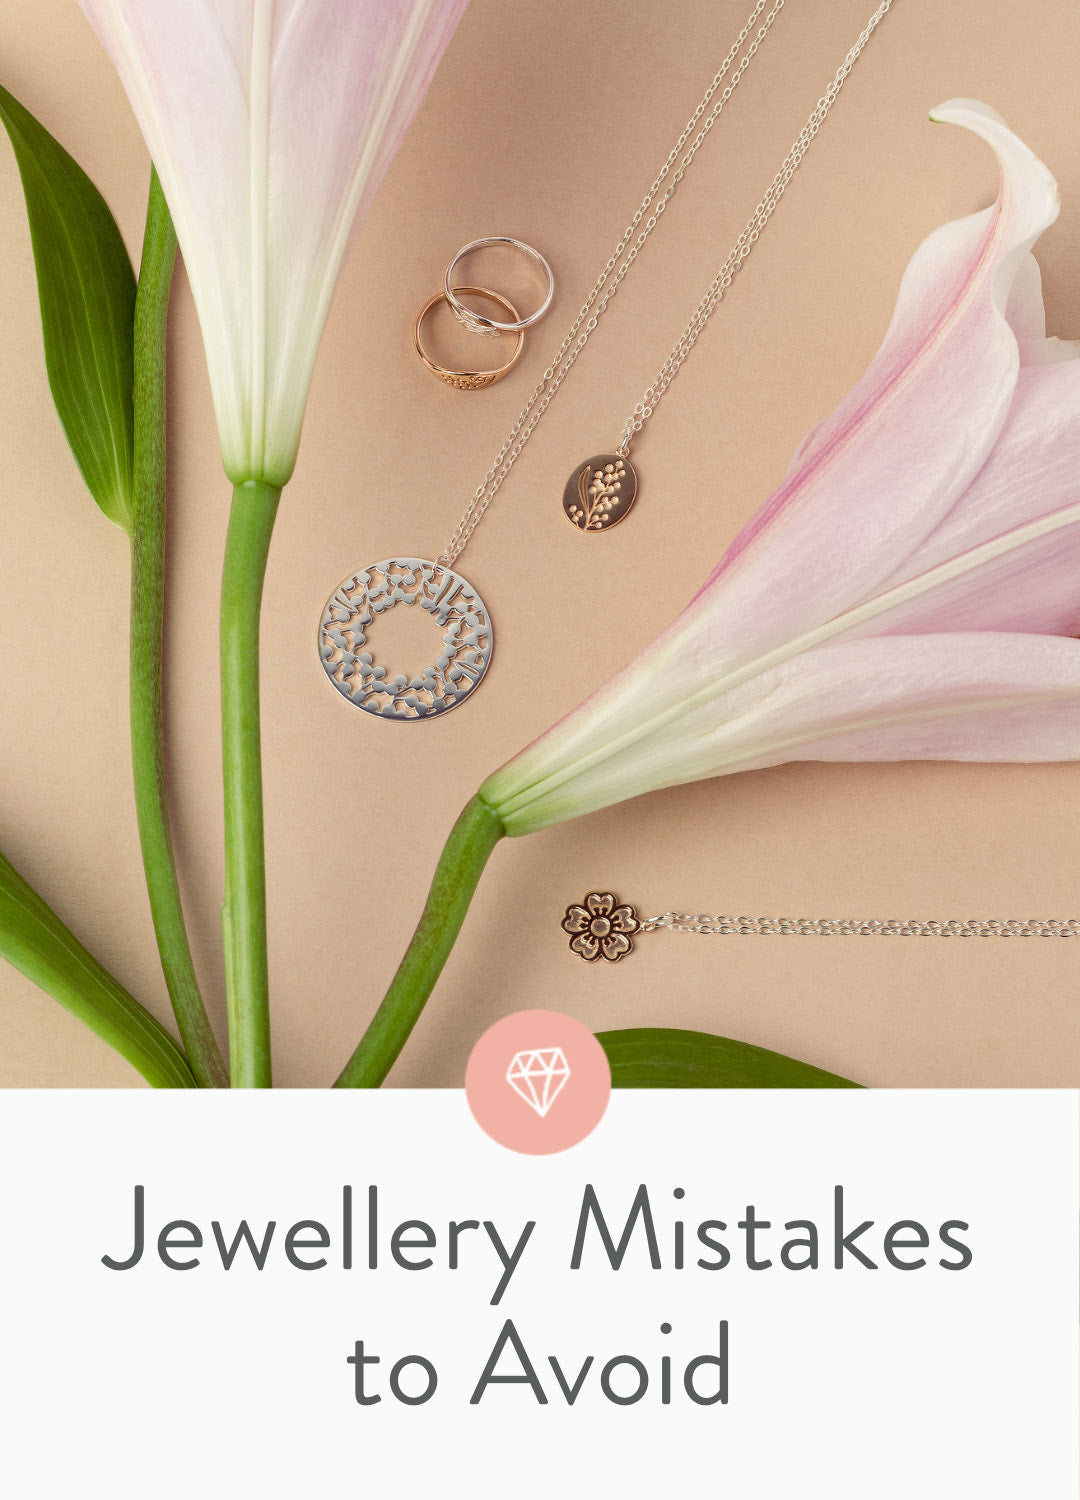 12 jewellery mistakes you're probably making and how to avoid them: tips from a jewellery professional.